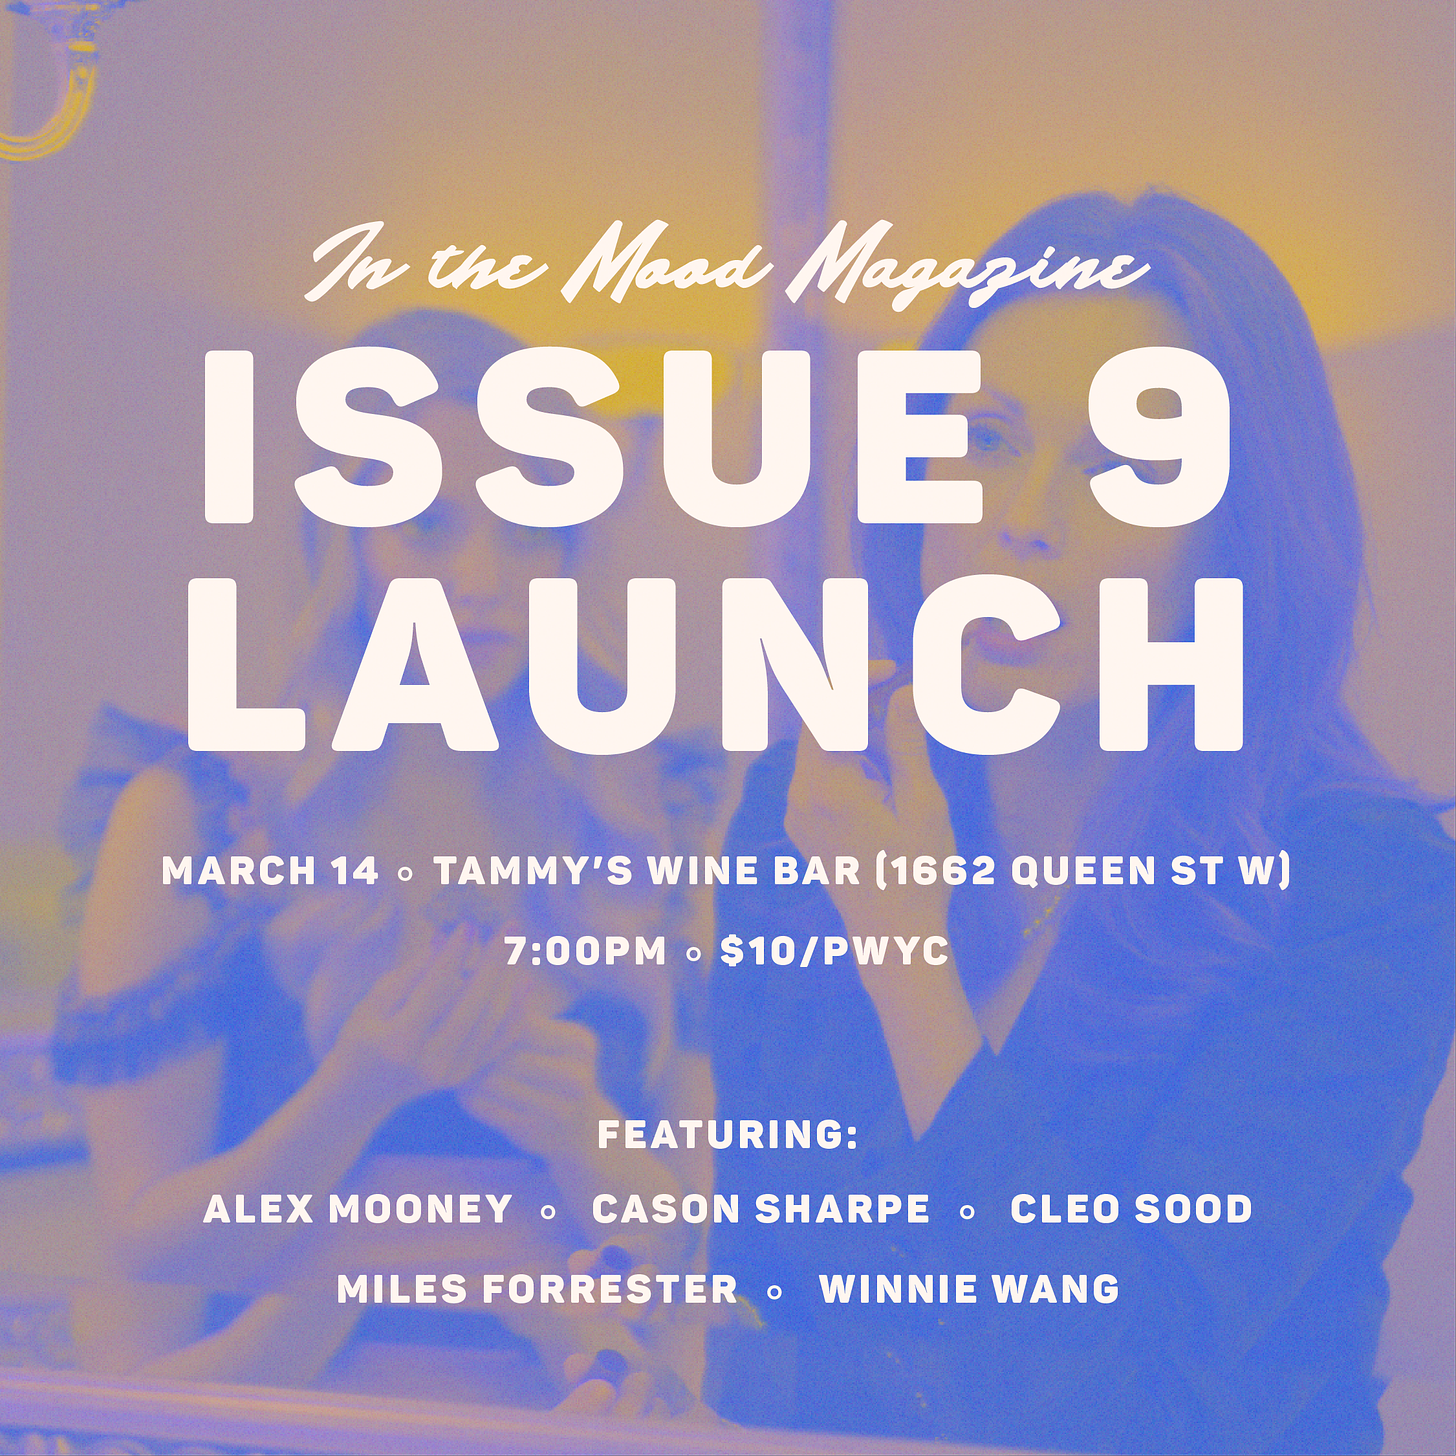 In The Mood Magazine Issue 9 Launch March 14 - Tammy's Wine Bar (1662 Queen St W) 7pm - $10/PWYC  Featuring: Alex Mooney, Cason Sharpe, Cleo Sood, Miles Forrester, Winnie Wang